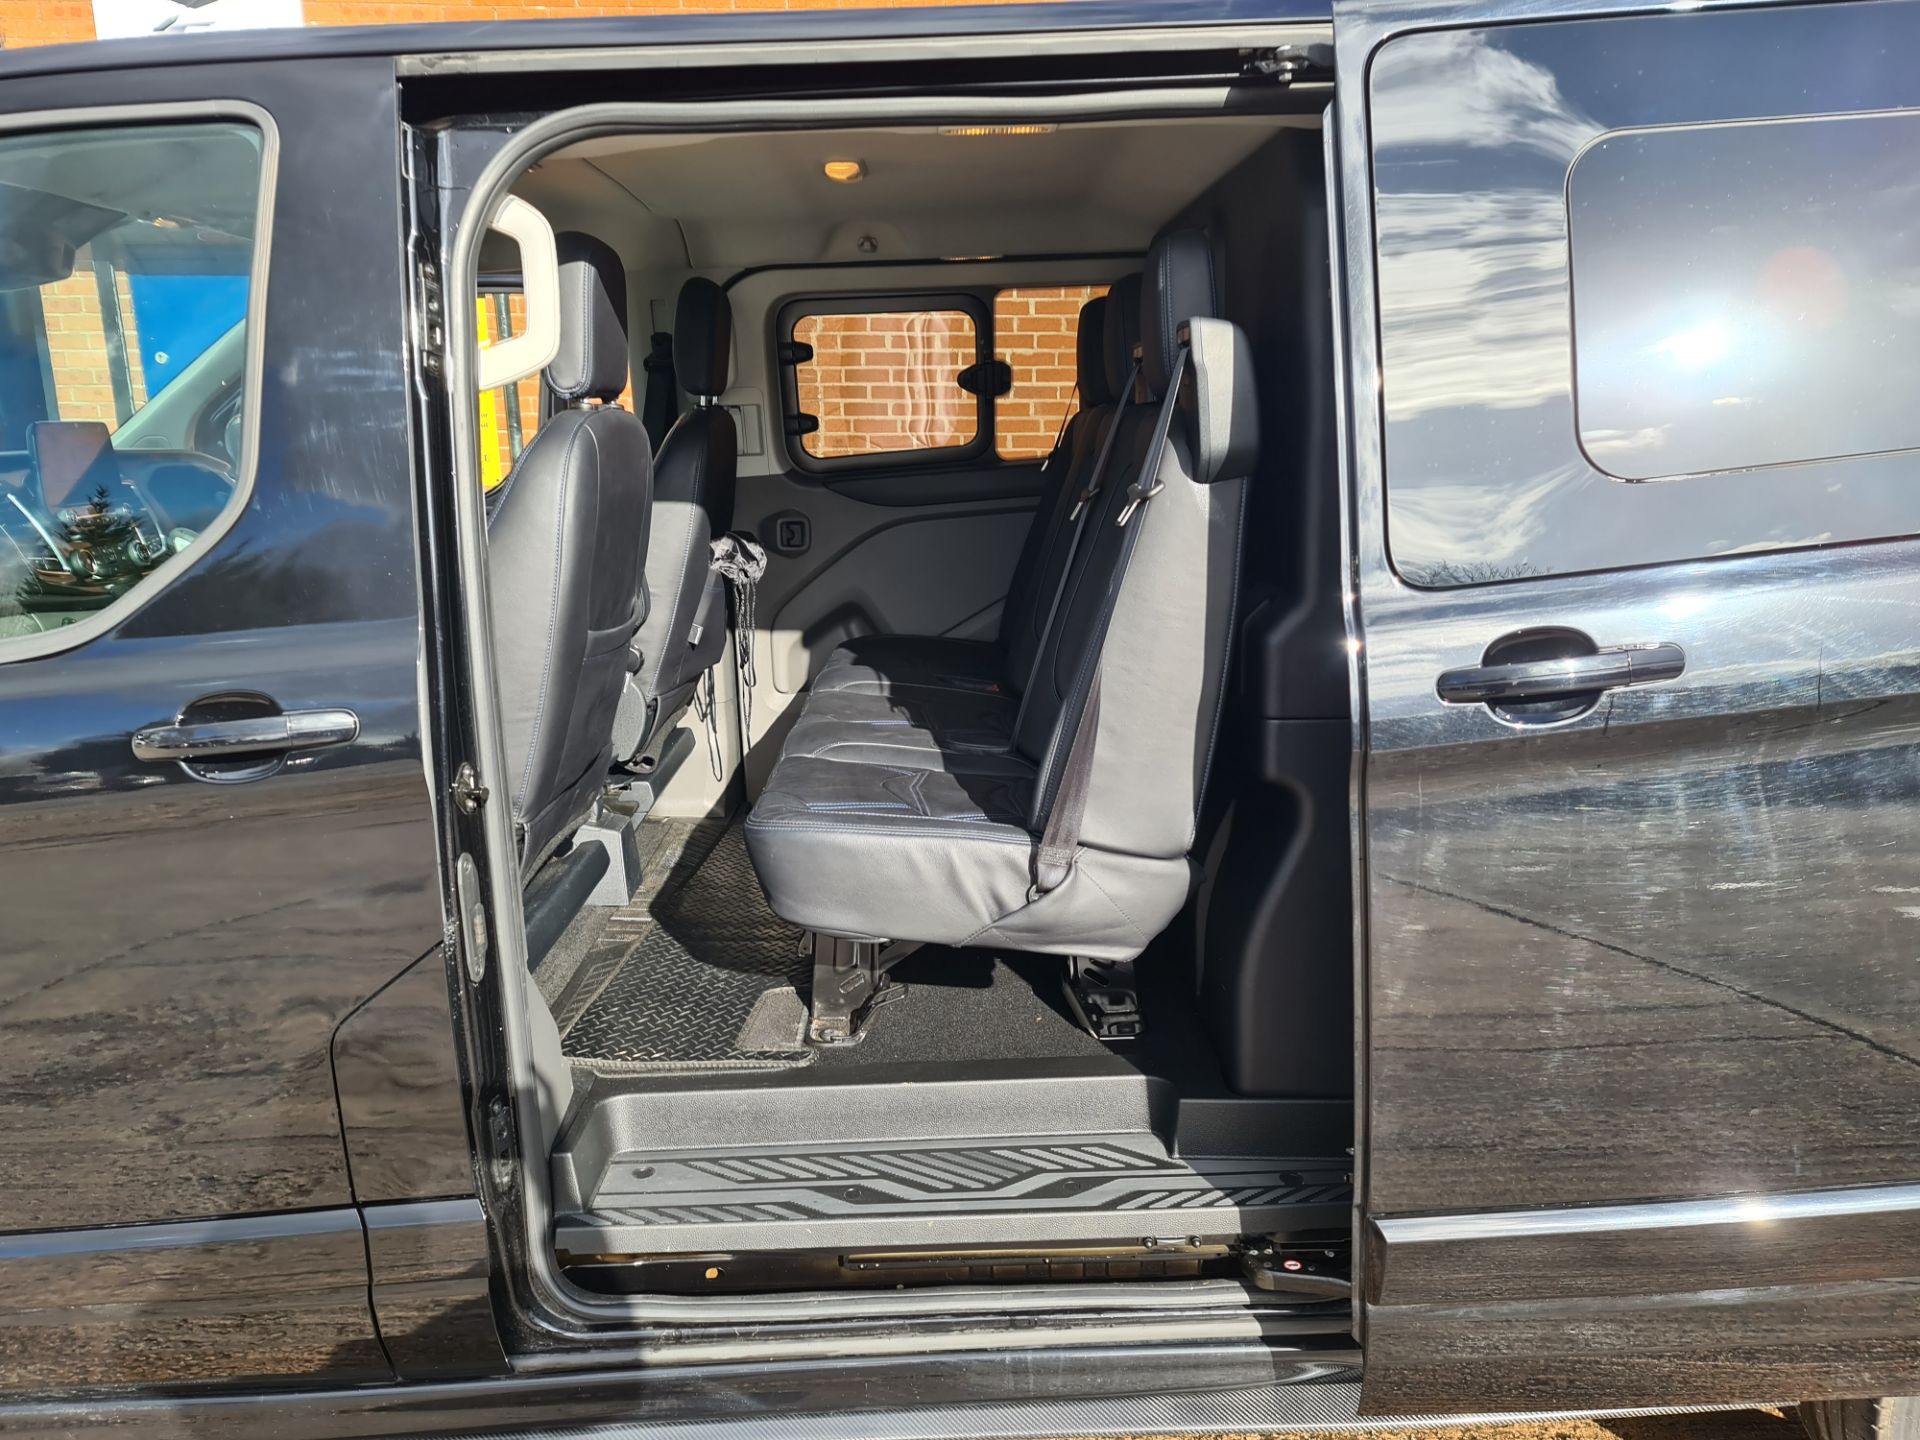 2021 Ford Transit 320LMTD Motion R panel van, auto gearbox, Ultra High Spec - Image 44 of 102